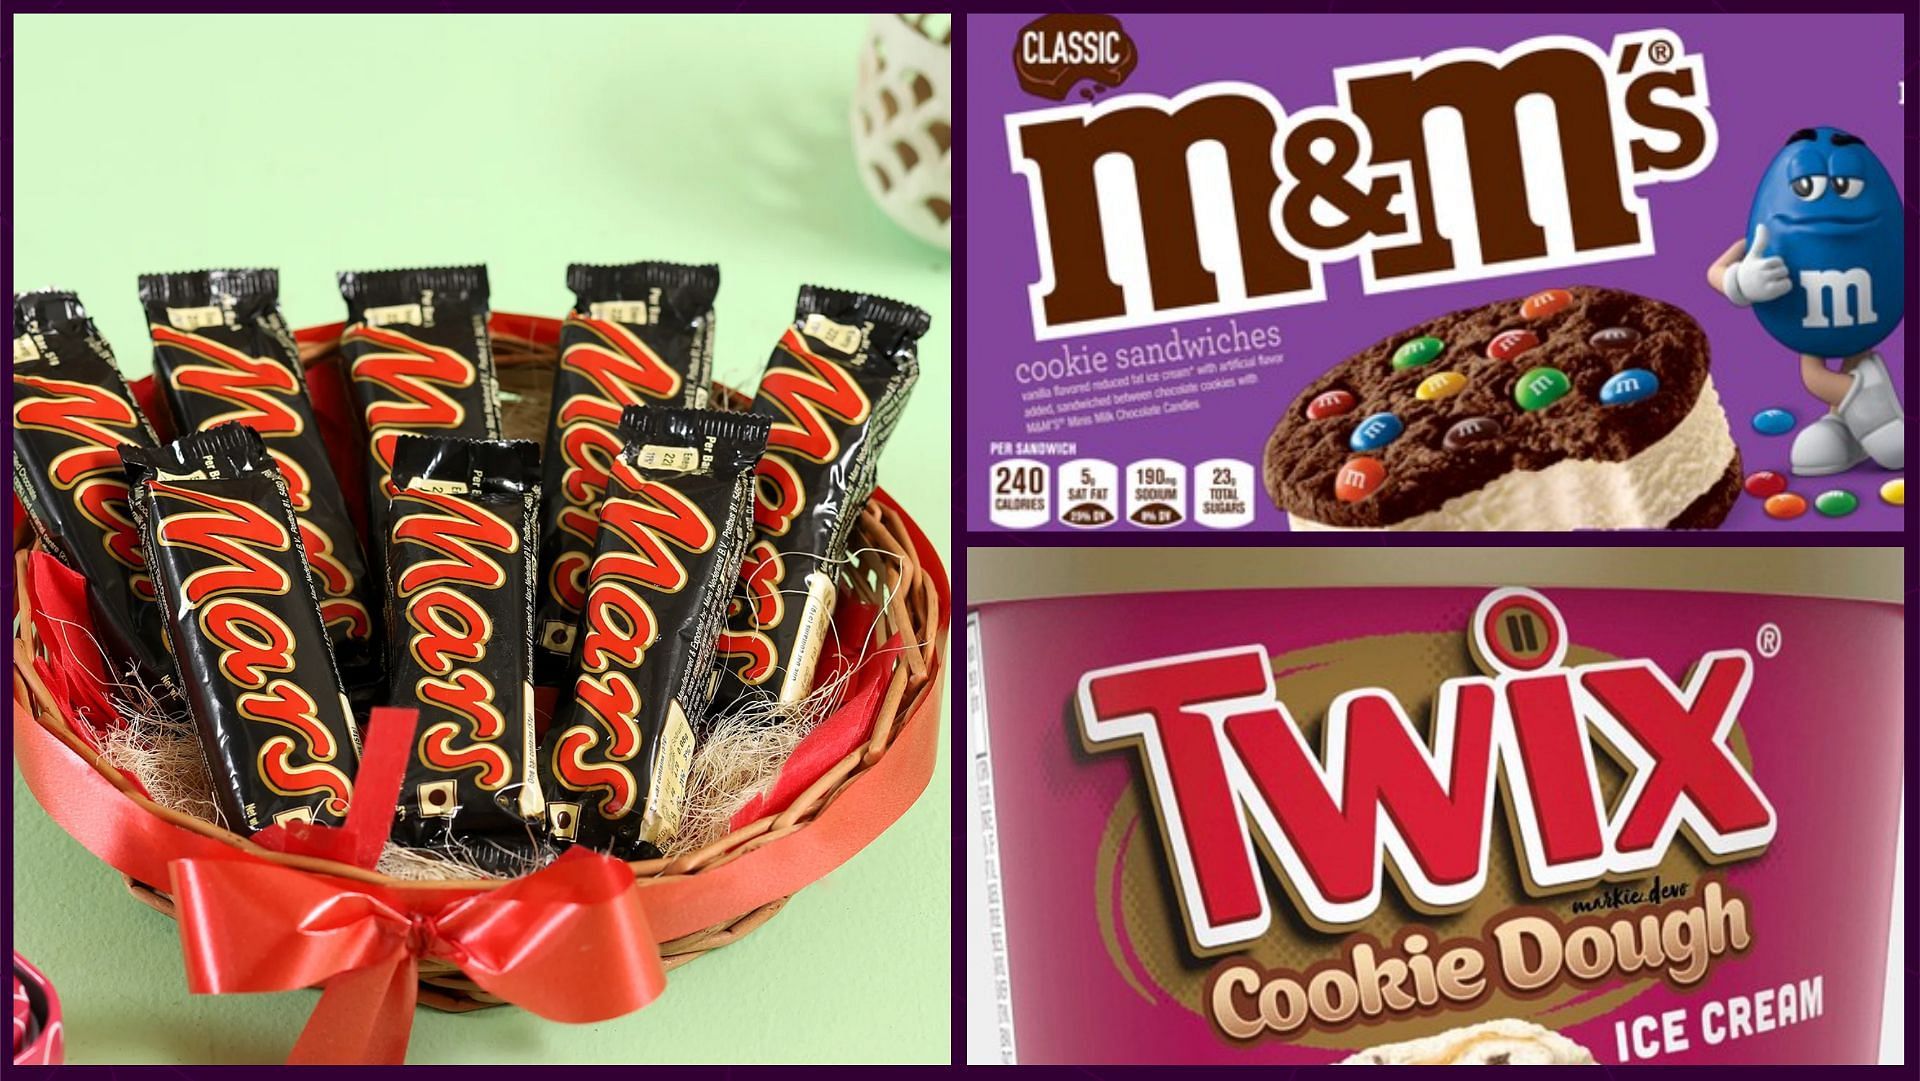 M&M's introducing hazelnut spread flavor and a new candy bar